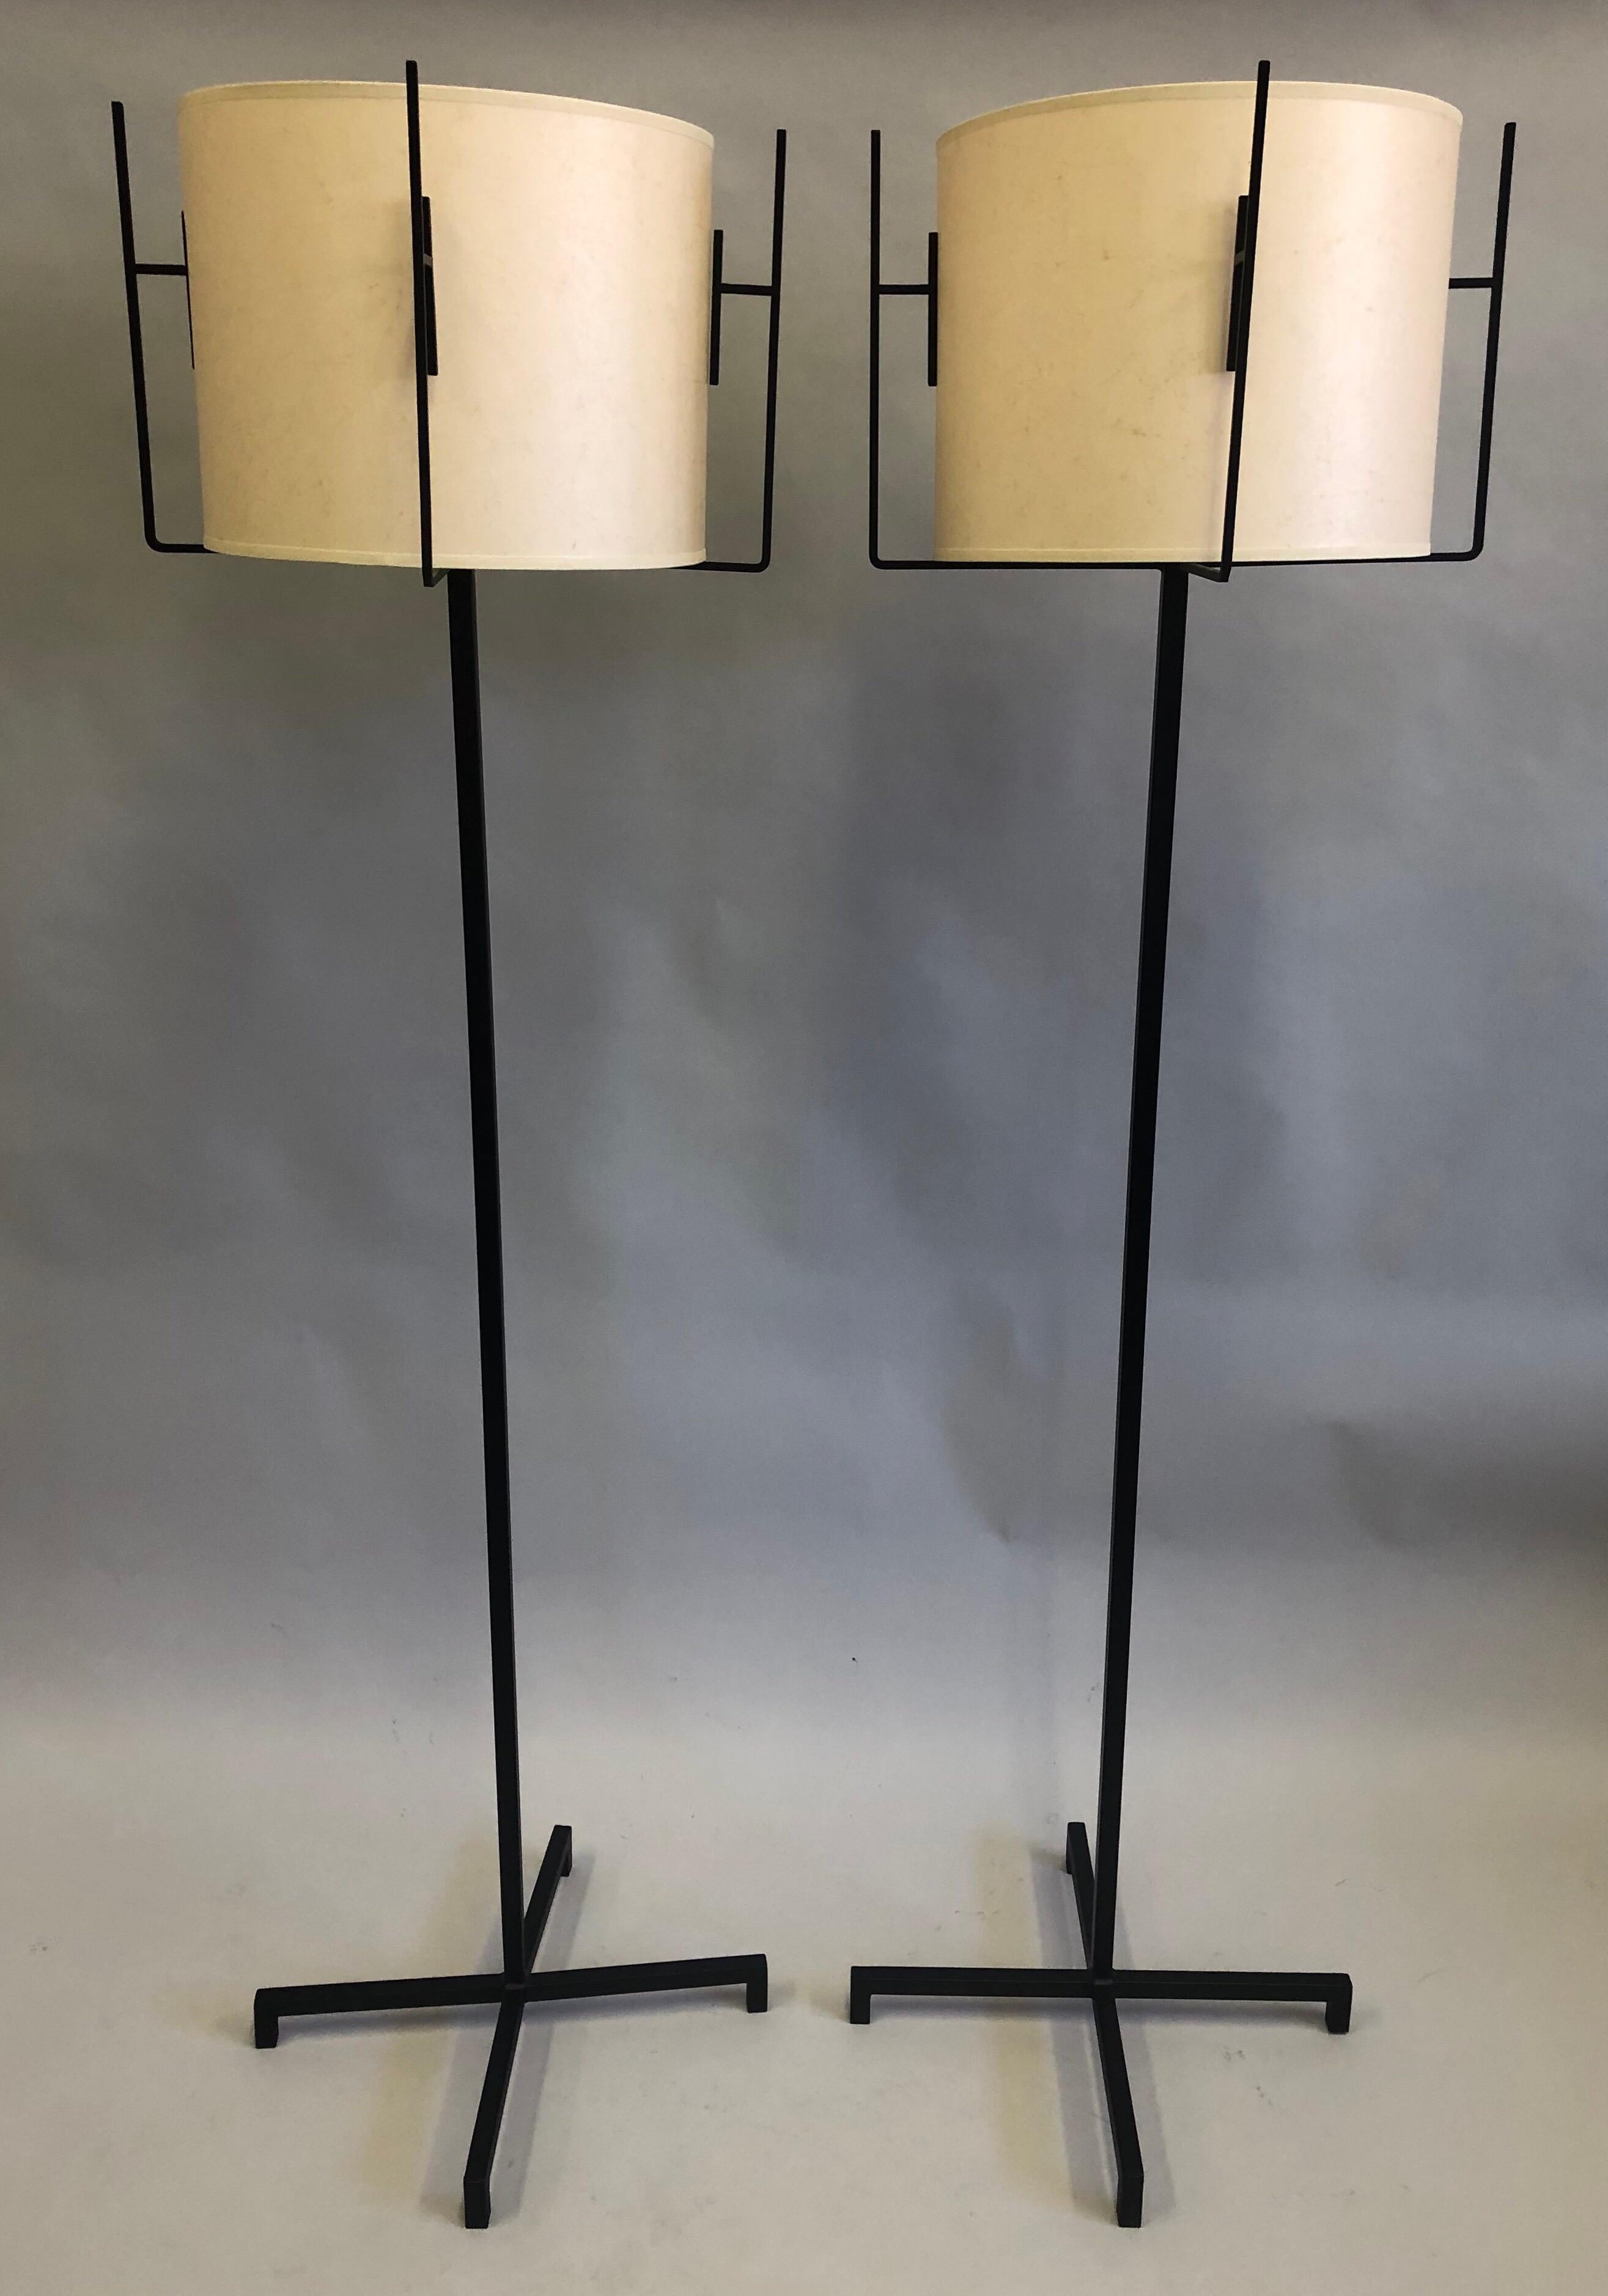 Elegant and Timeless Pair of French Mid-Century Modern Neoclassical wrought iron floor lamps by Jacques Adnet with parchment paper shades. The standing lamps have unique cross form design support system to hold the shades and this is mirrored by the